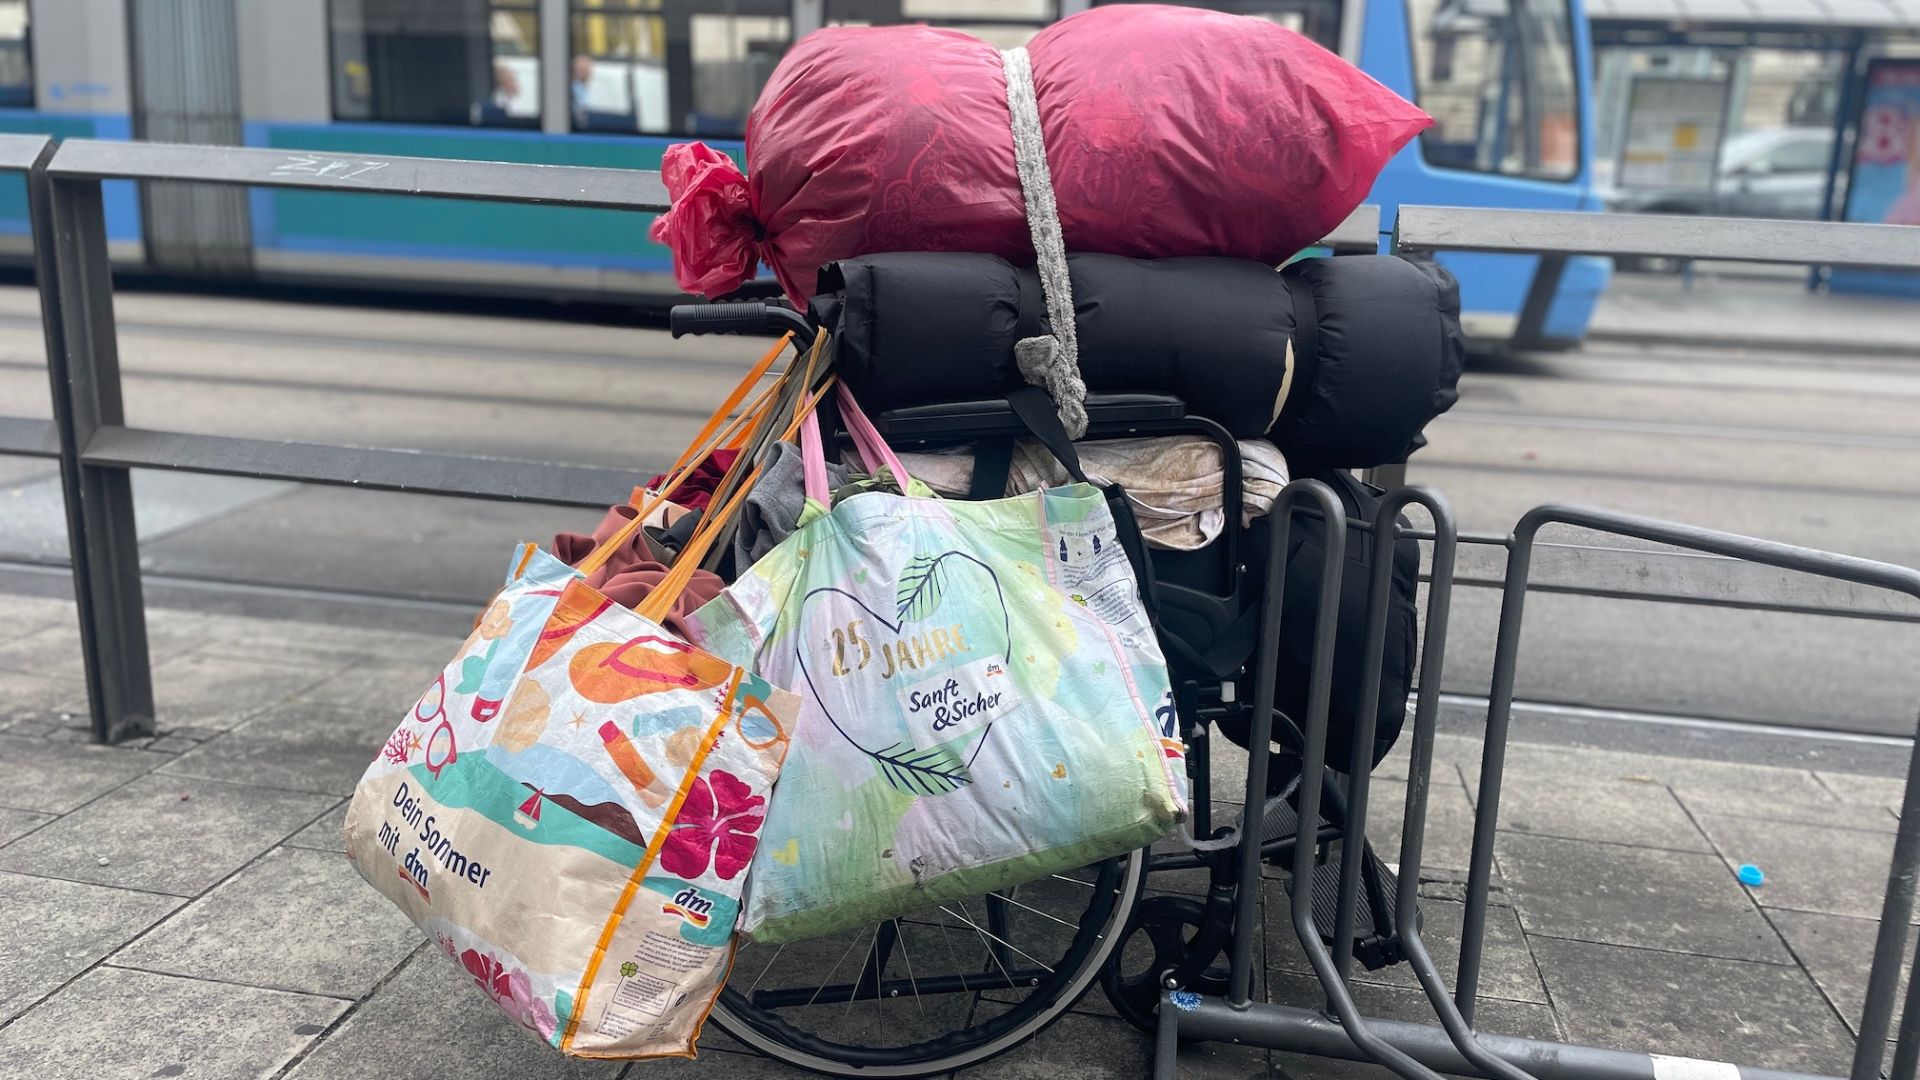 A homeless person's bundled-up possessions: a common sight in Germany. /Natalie Carney/CGTN